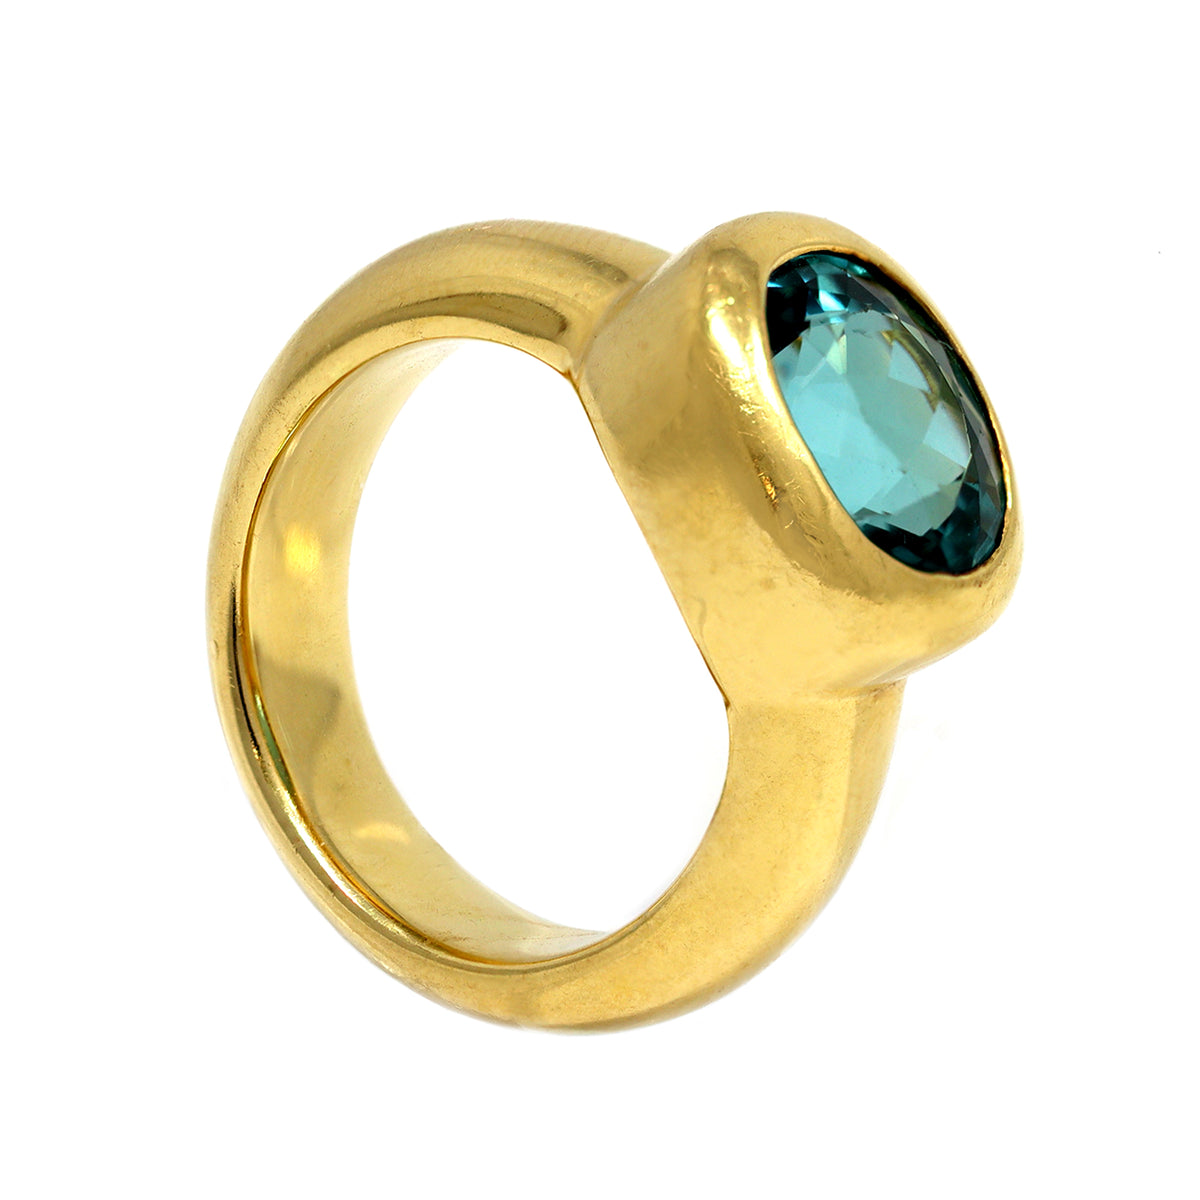 Oval-Cut Light Green Tourmaline Ring Set in 18k Yellow Gold side view